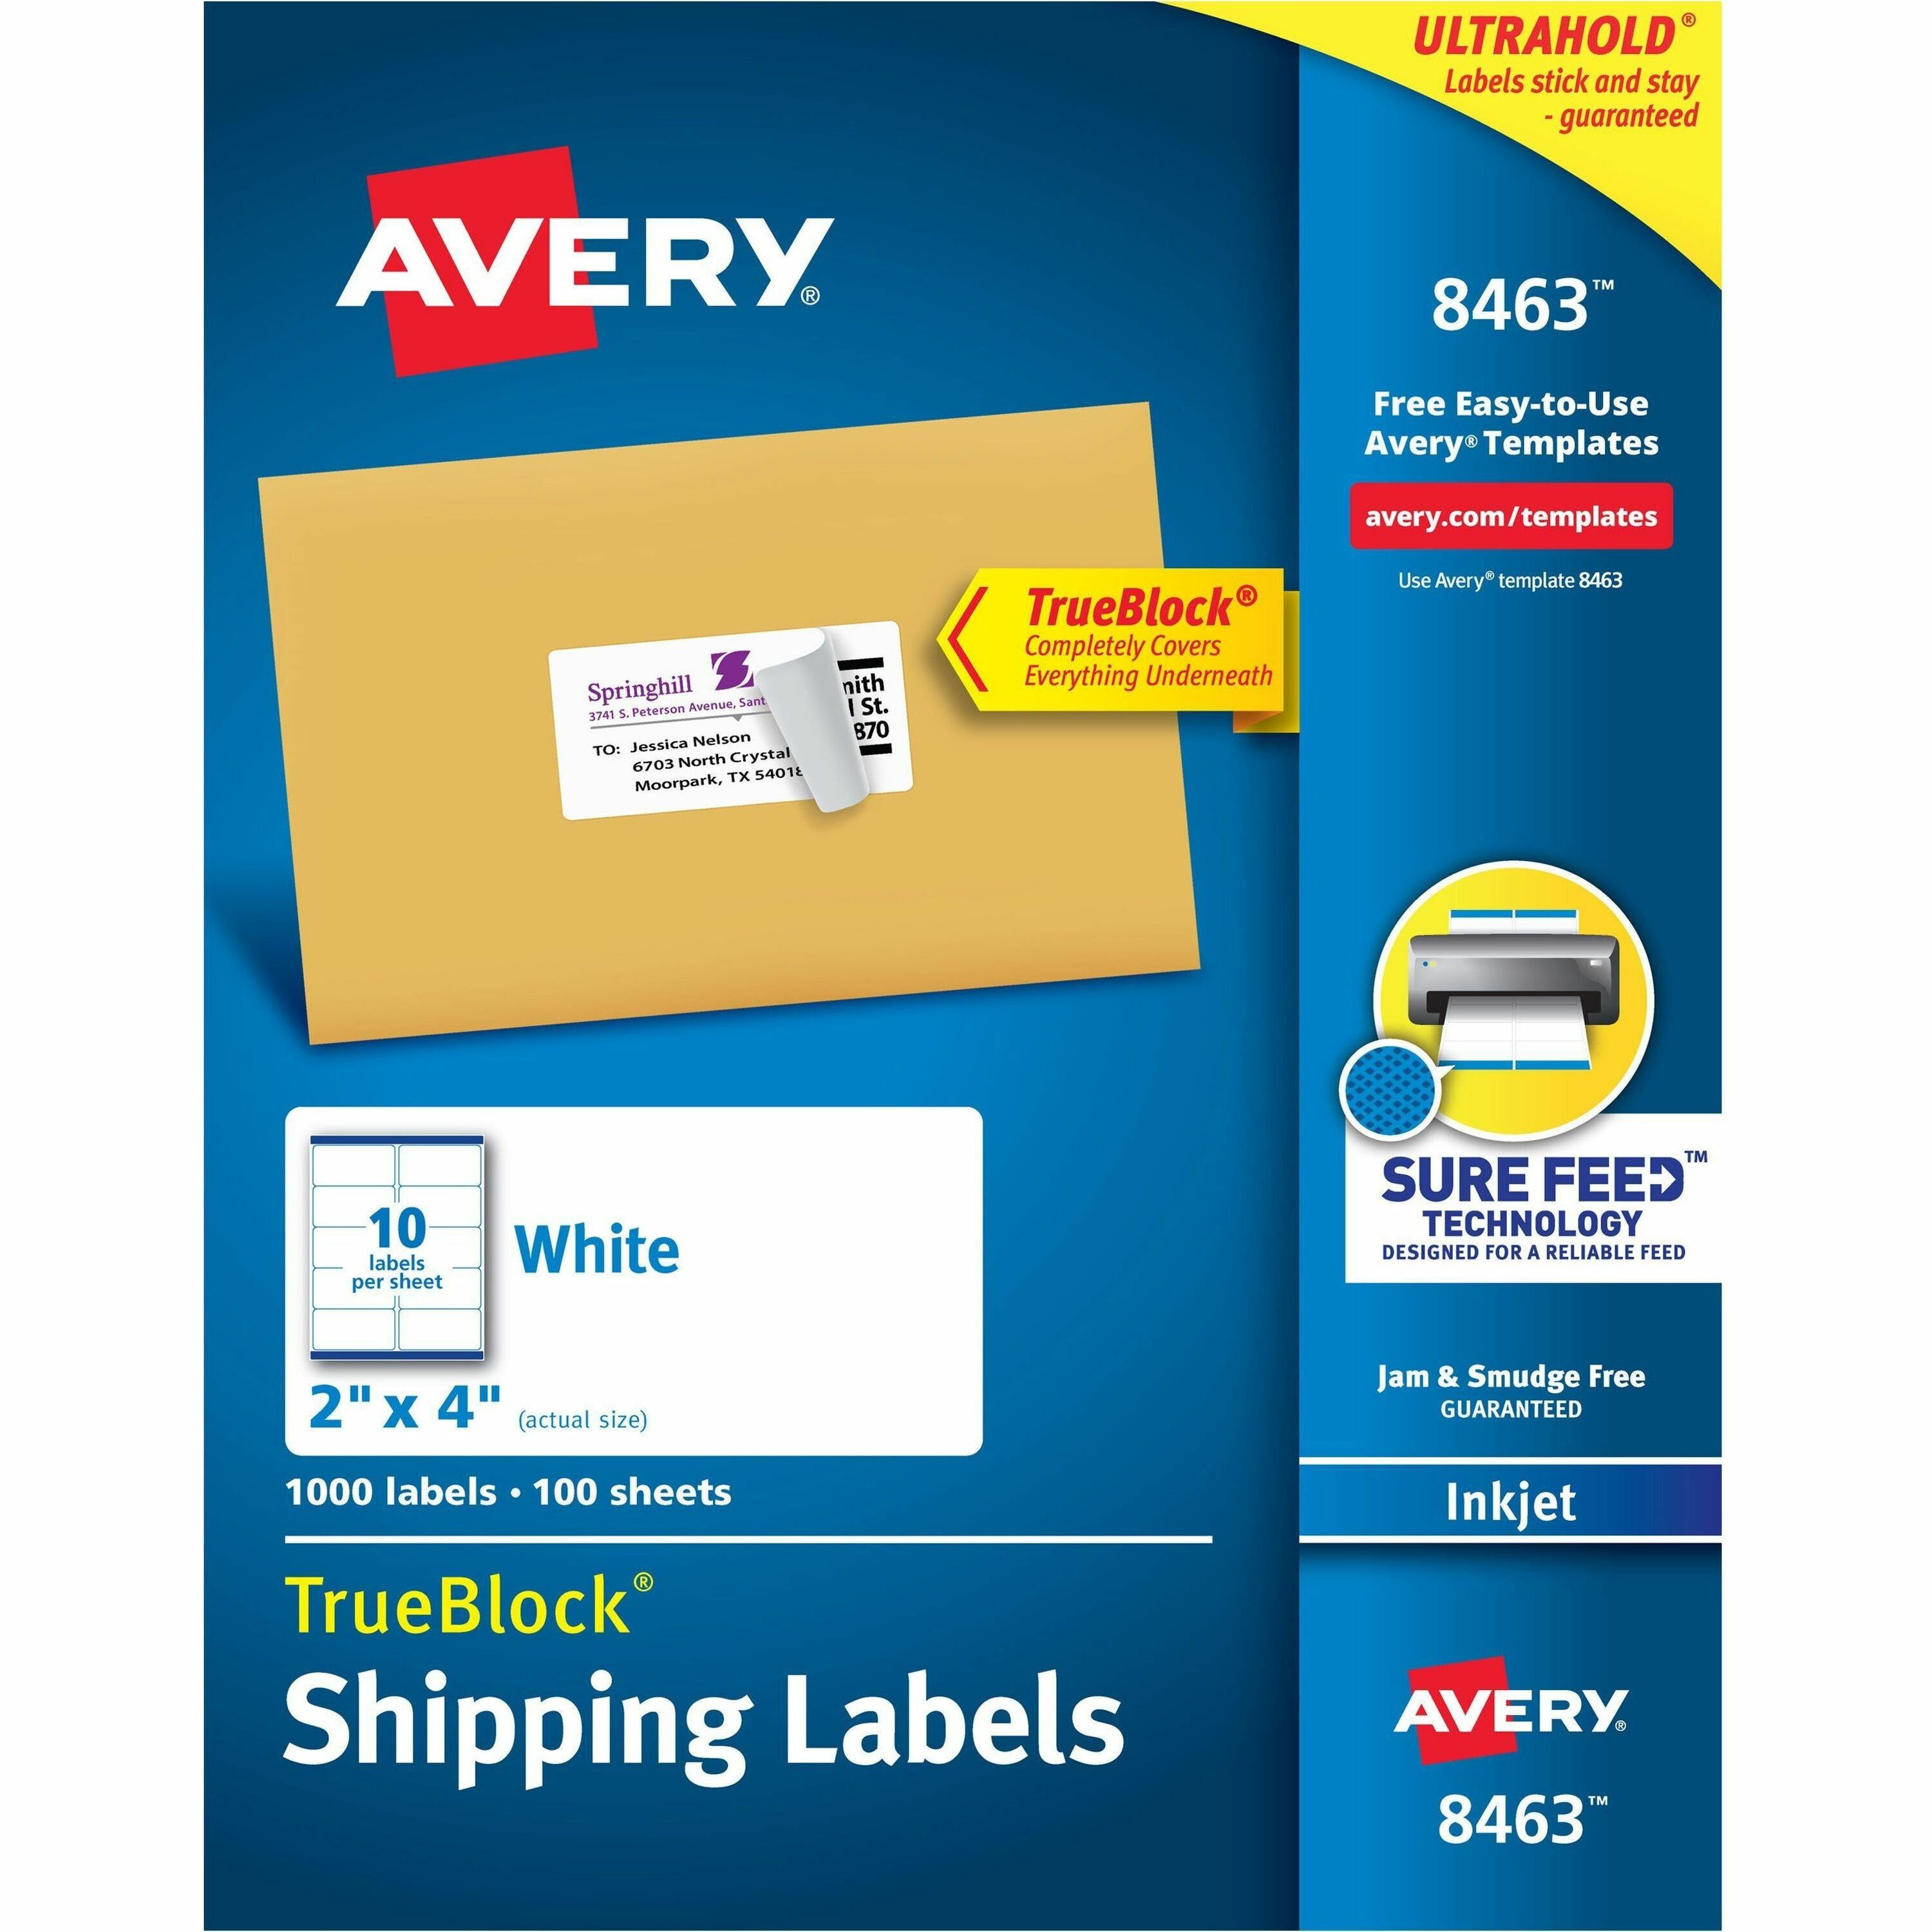 avery label 5630 printed outside template word